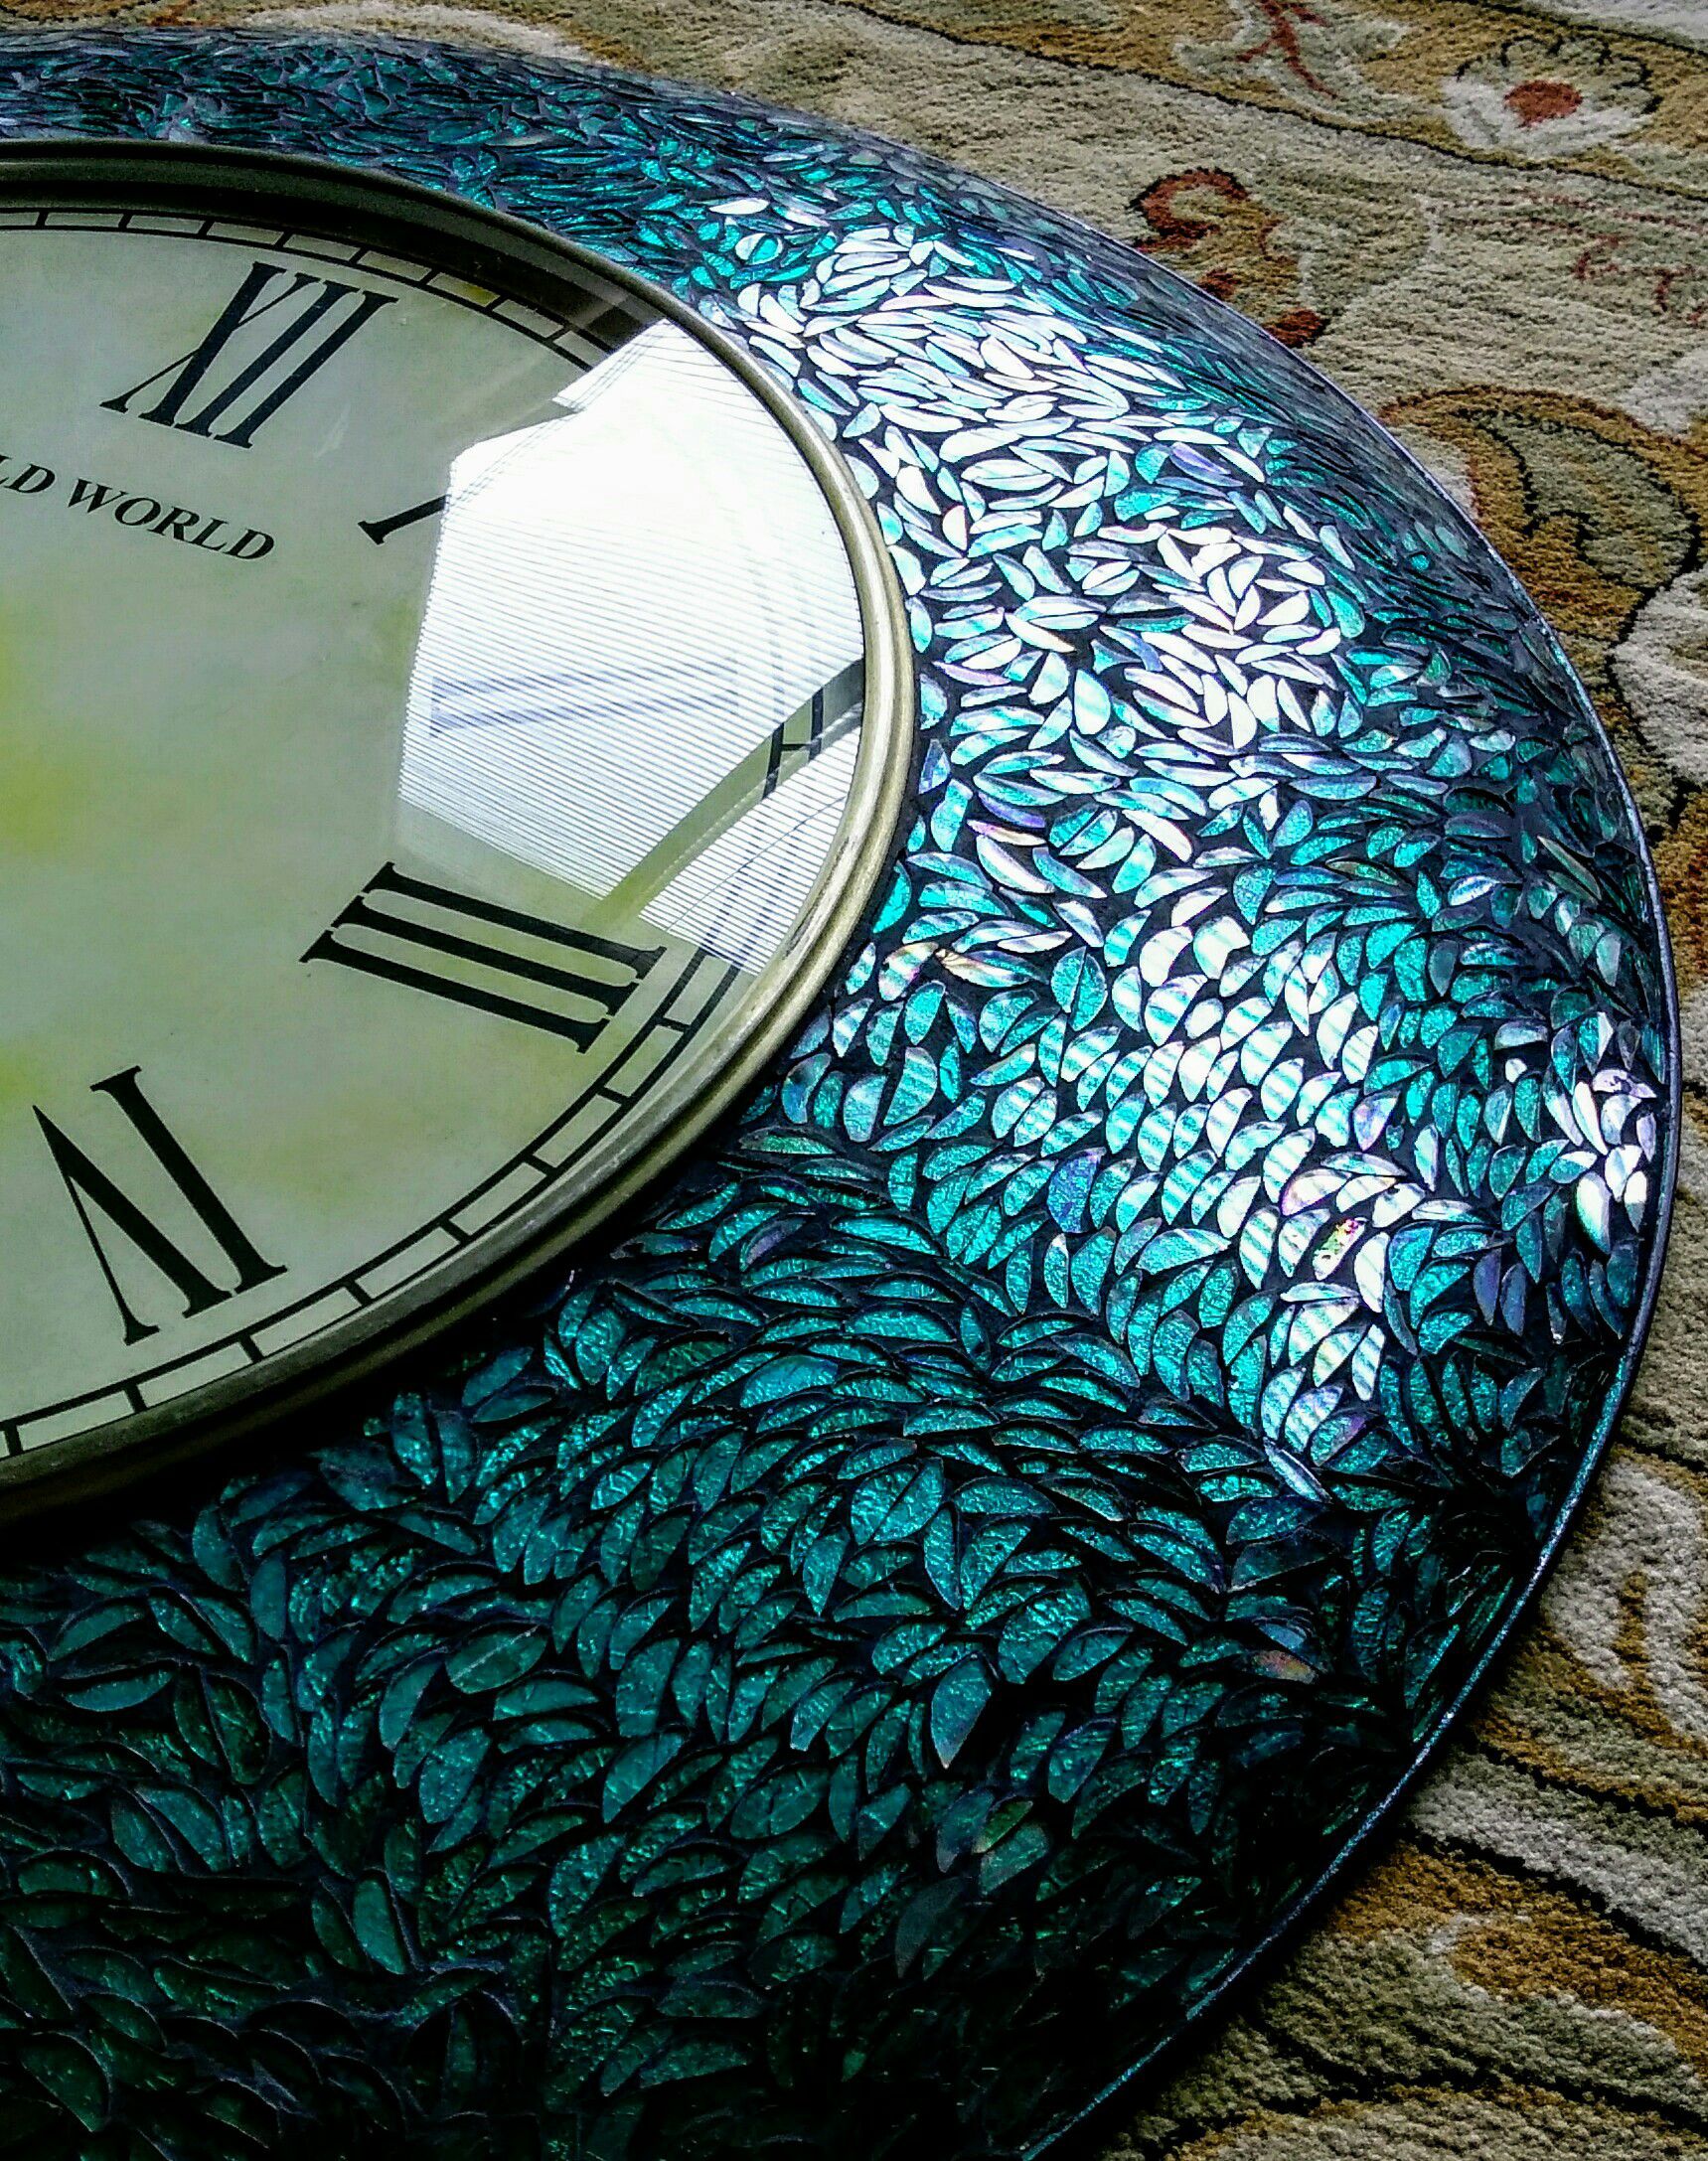 Pier 1 Imports "Old World" peacock mosaic large decorative wall clock